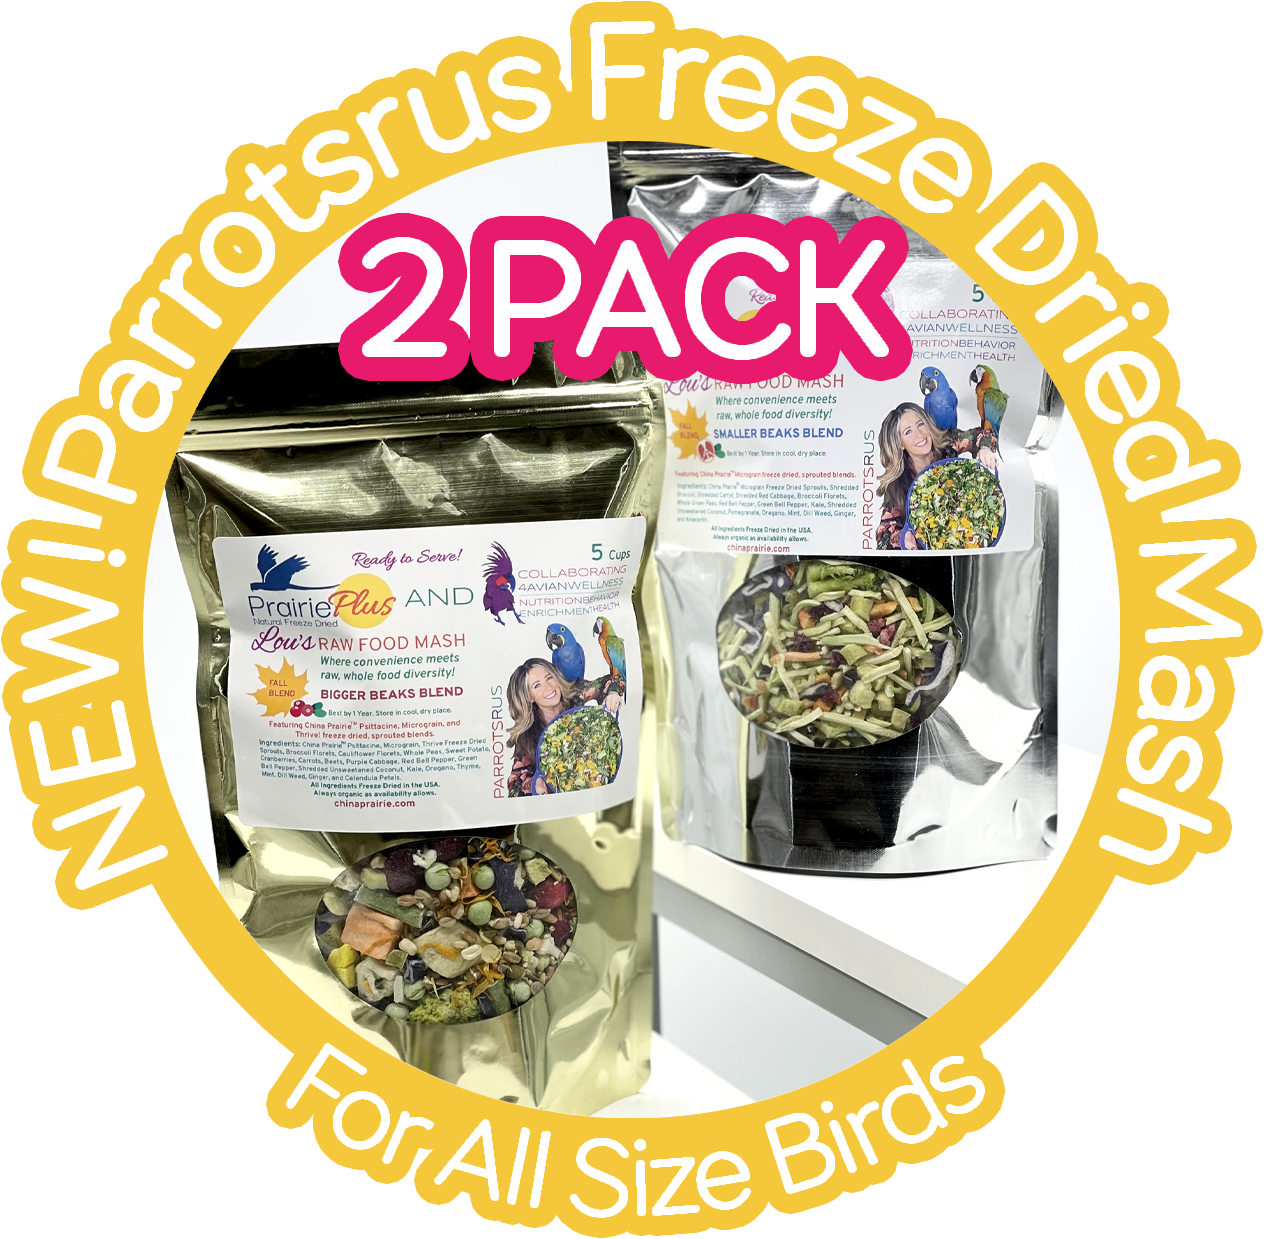 2 Pack NEW! Parrotsrus Freeze Dried Weekly Raw Food Mash -- Small Beak Blend -- You have asked me for years to offer my weekly raw food mash to buy, I am excited to say here it is!!!